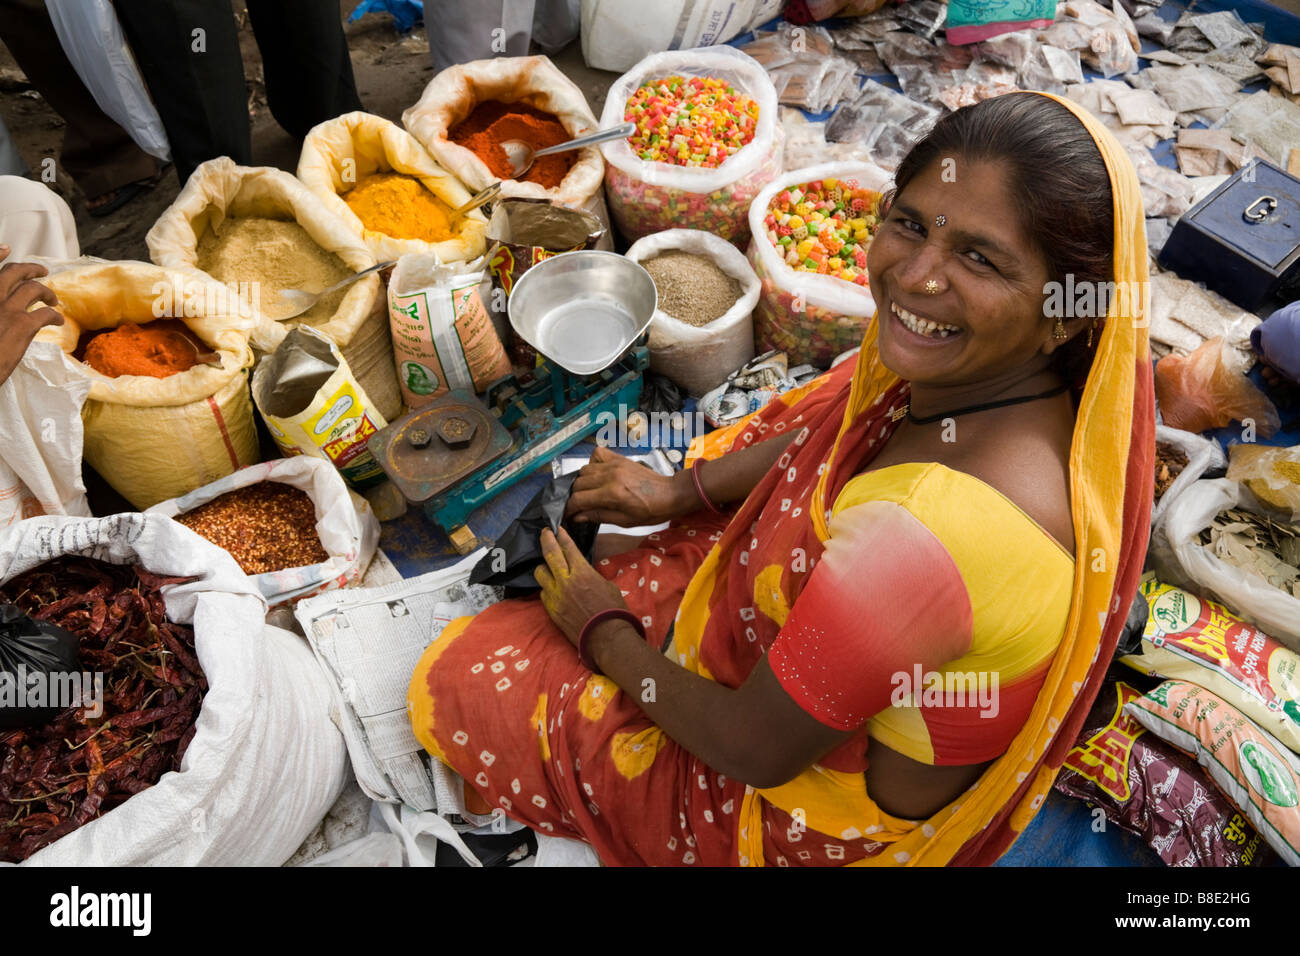 Spices for sale at a street market spice stall, with street seller. Hazira, Surat, Gujarat. India. Stock Photo